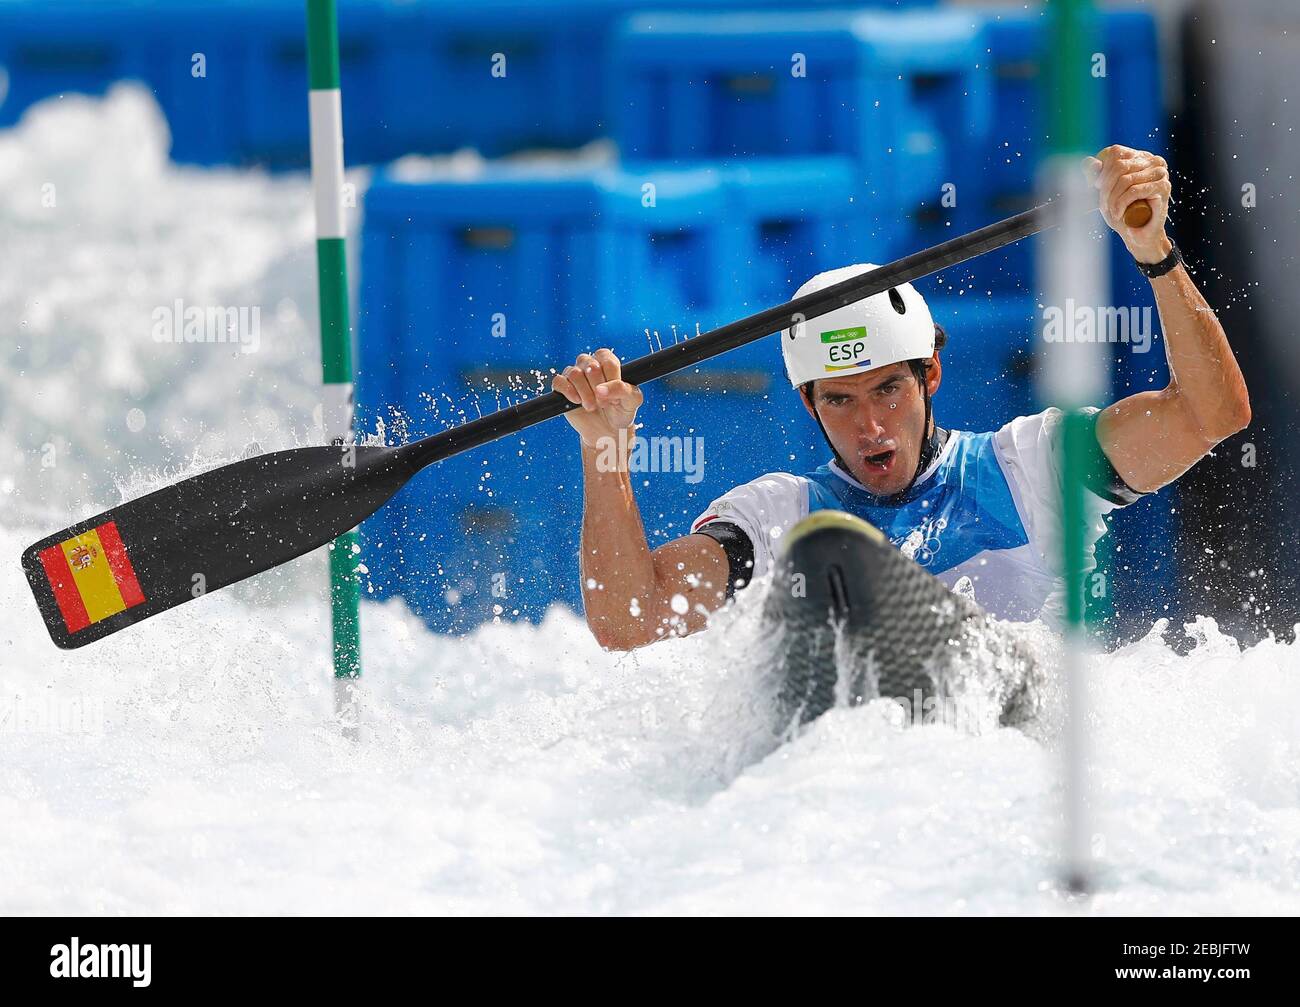 2016 Rio Olympics - Canoe Slalom - Preliminary - Men's Canoe Single (C1) Heats - Whitewater Stadium - Rio de Janeiro, Brazil - 07/08/2016. Ander Elosegi (ESP) of Spain competes. REUTERS/Ivan Alvarado FOR EDITORIAL USE ONLY. NOT FOR SALE FOR MARKETING OR ADVERTISING CAMPAIGNS.   Picture Supplied by Action Images Stock Photo